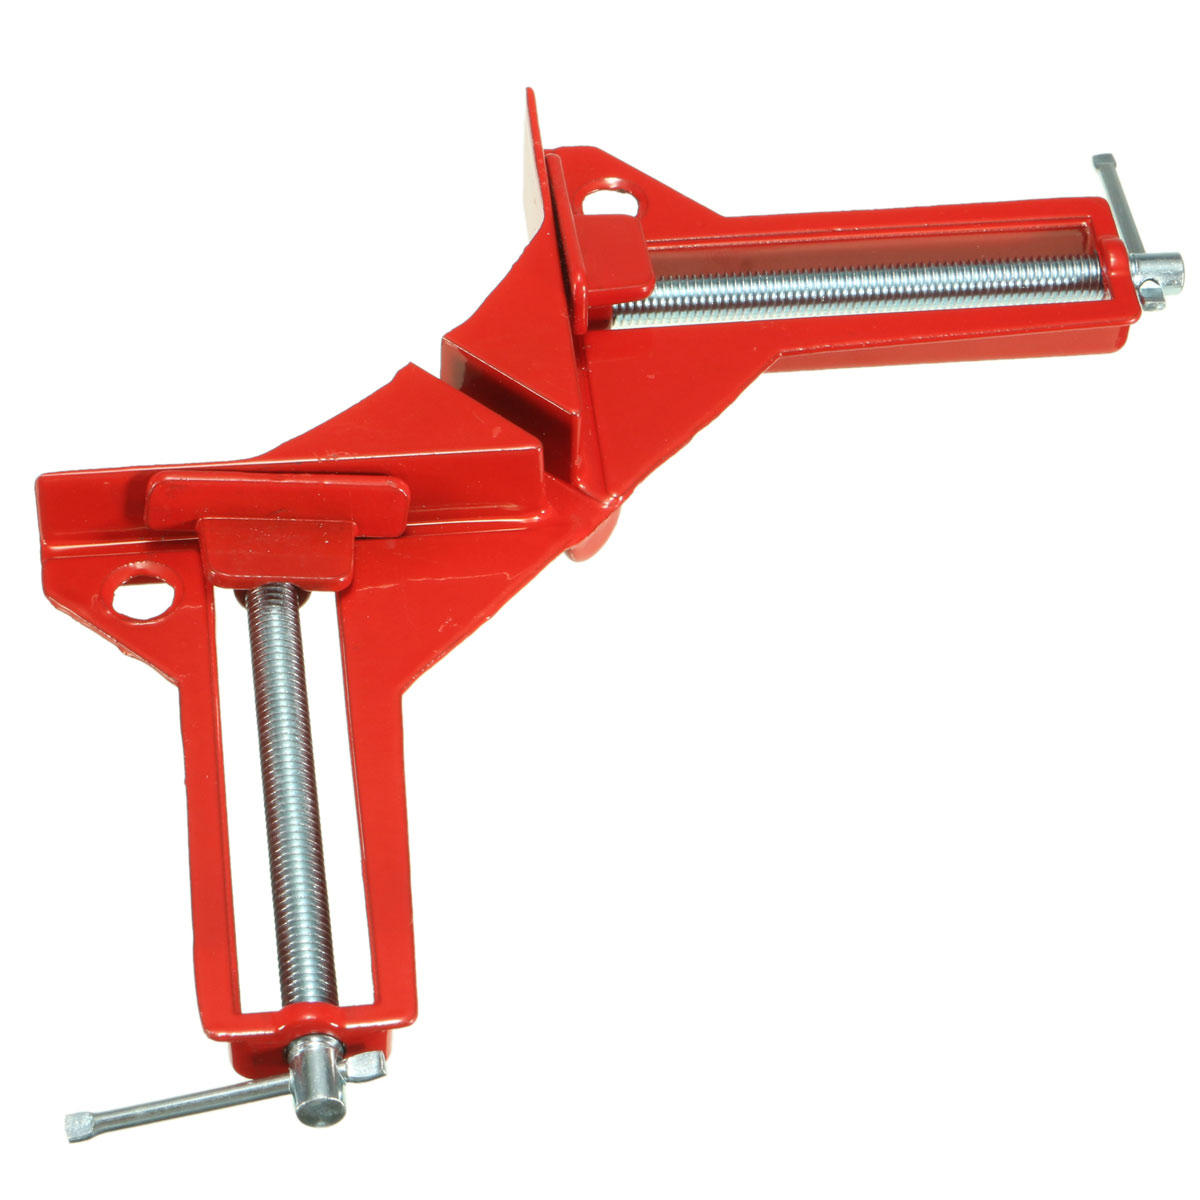 Oskool 90 Degree Right Angle Clamp Corner Clamp Woodworking Tools